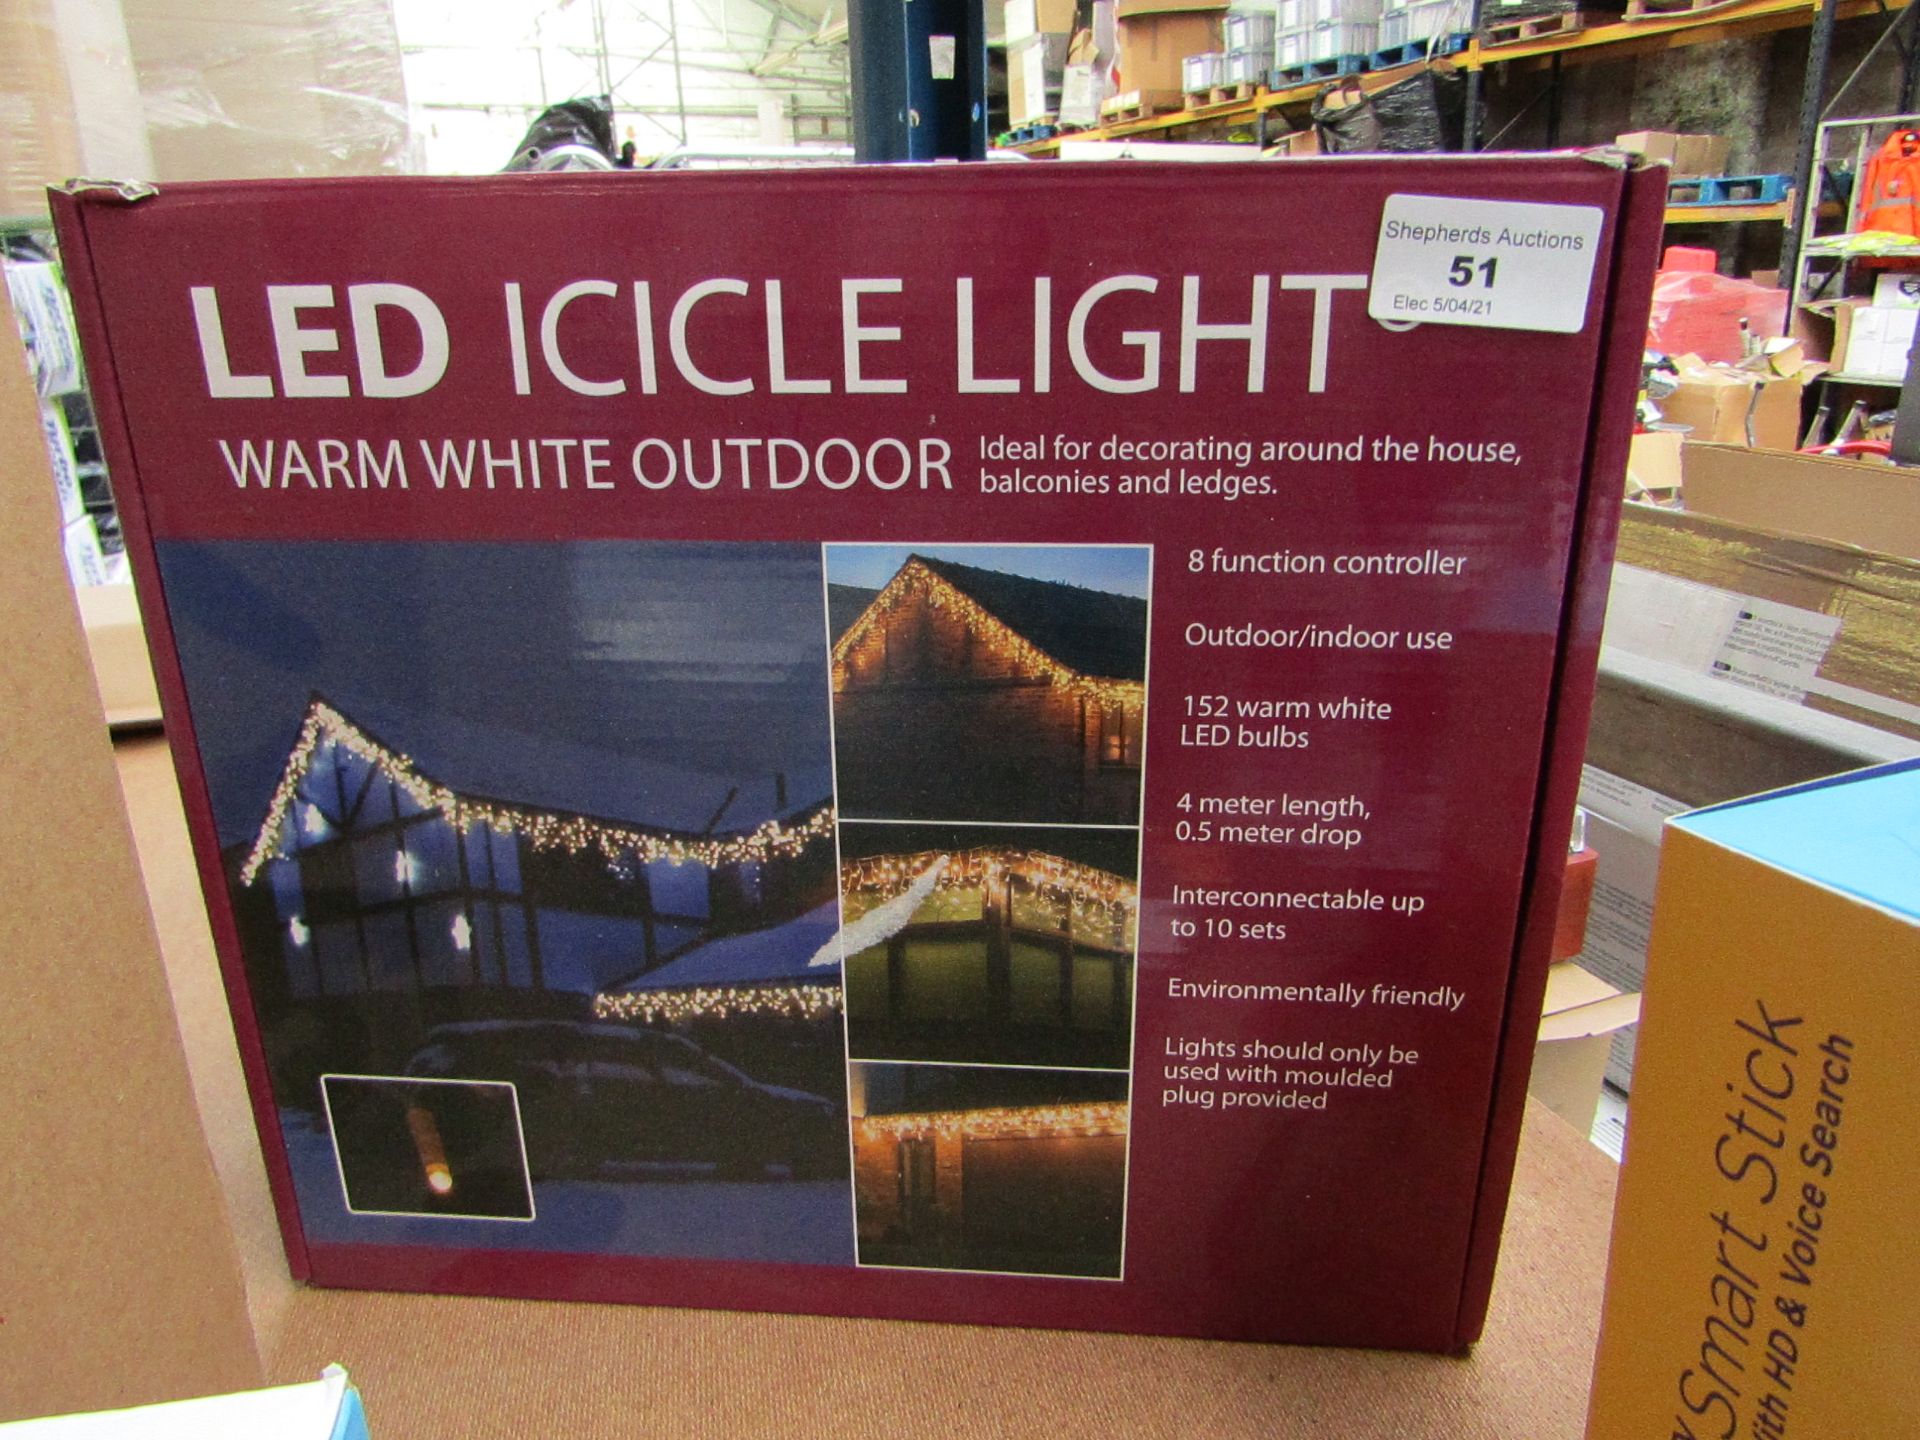 LED ICICLE Light WARM White Outdoor Lights Unchecked & Boxed